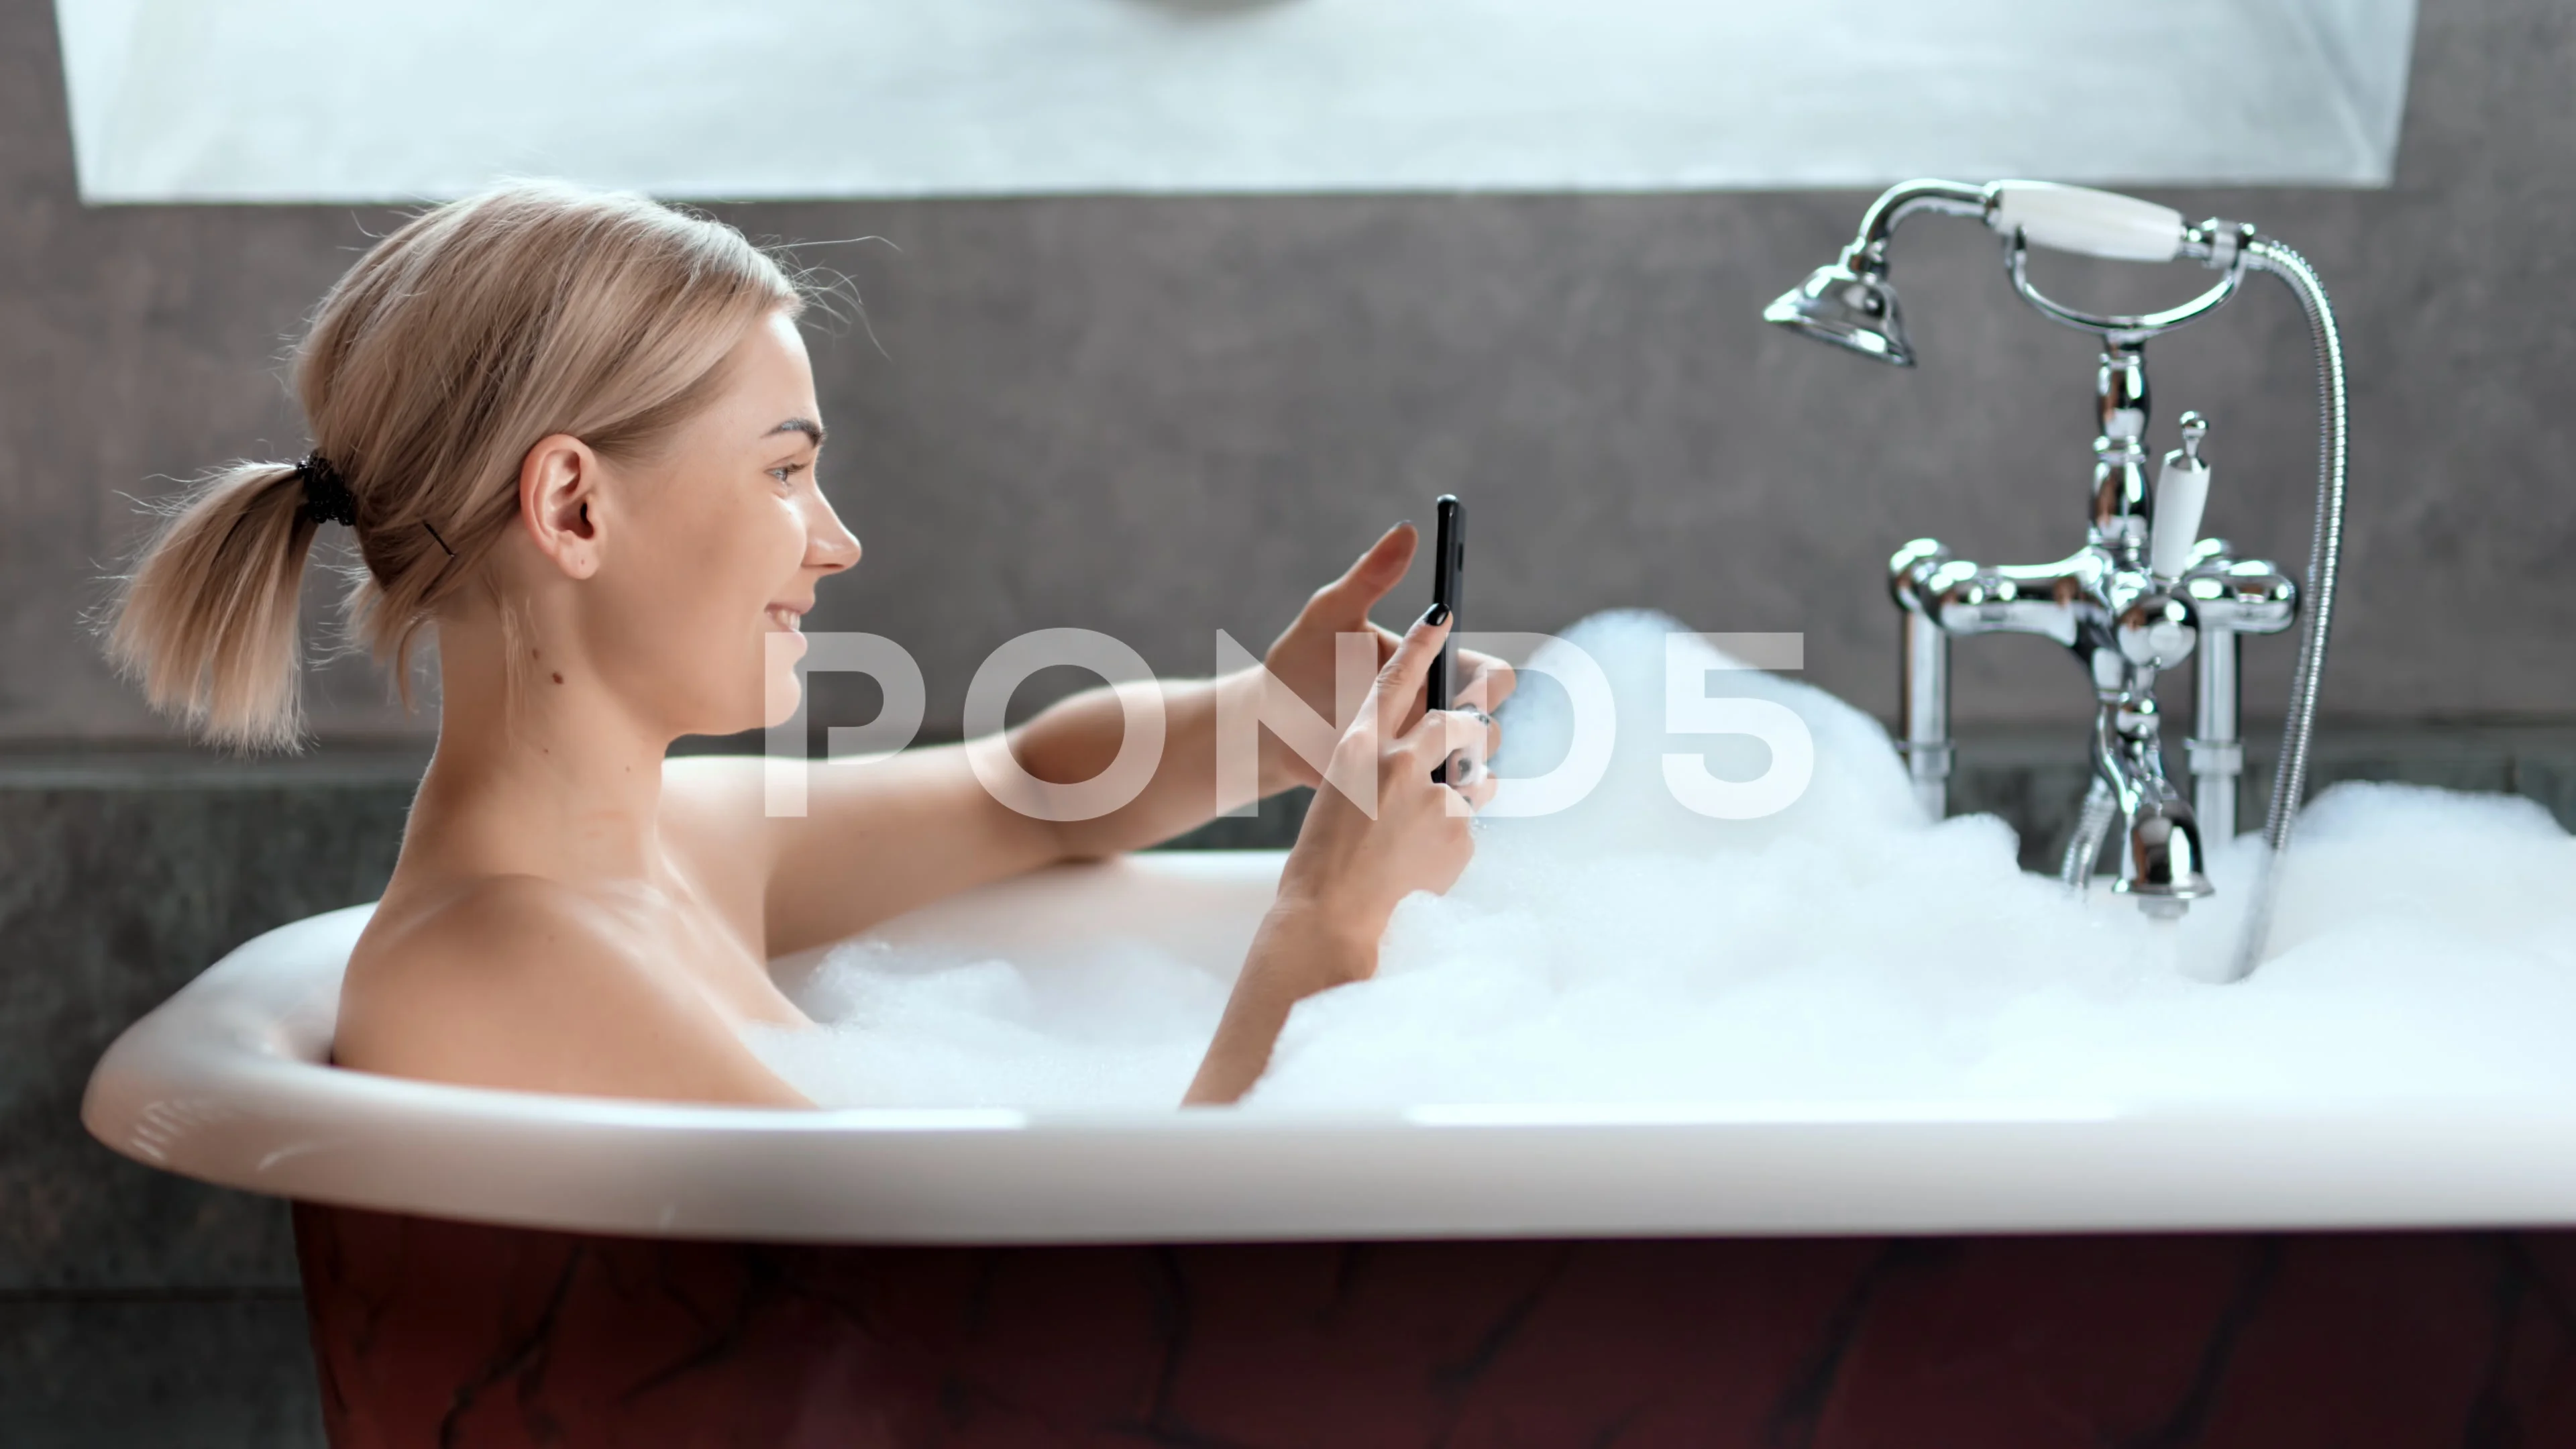 adam zweig recommends naked woman taking a bath pic